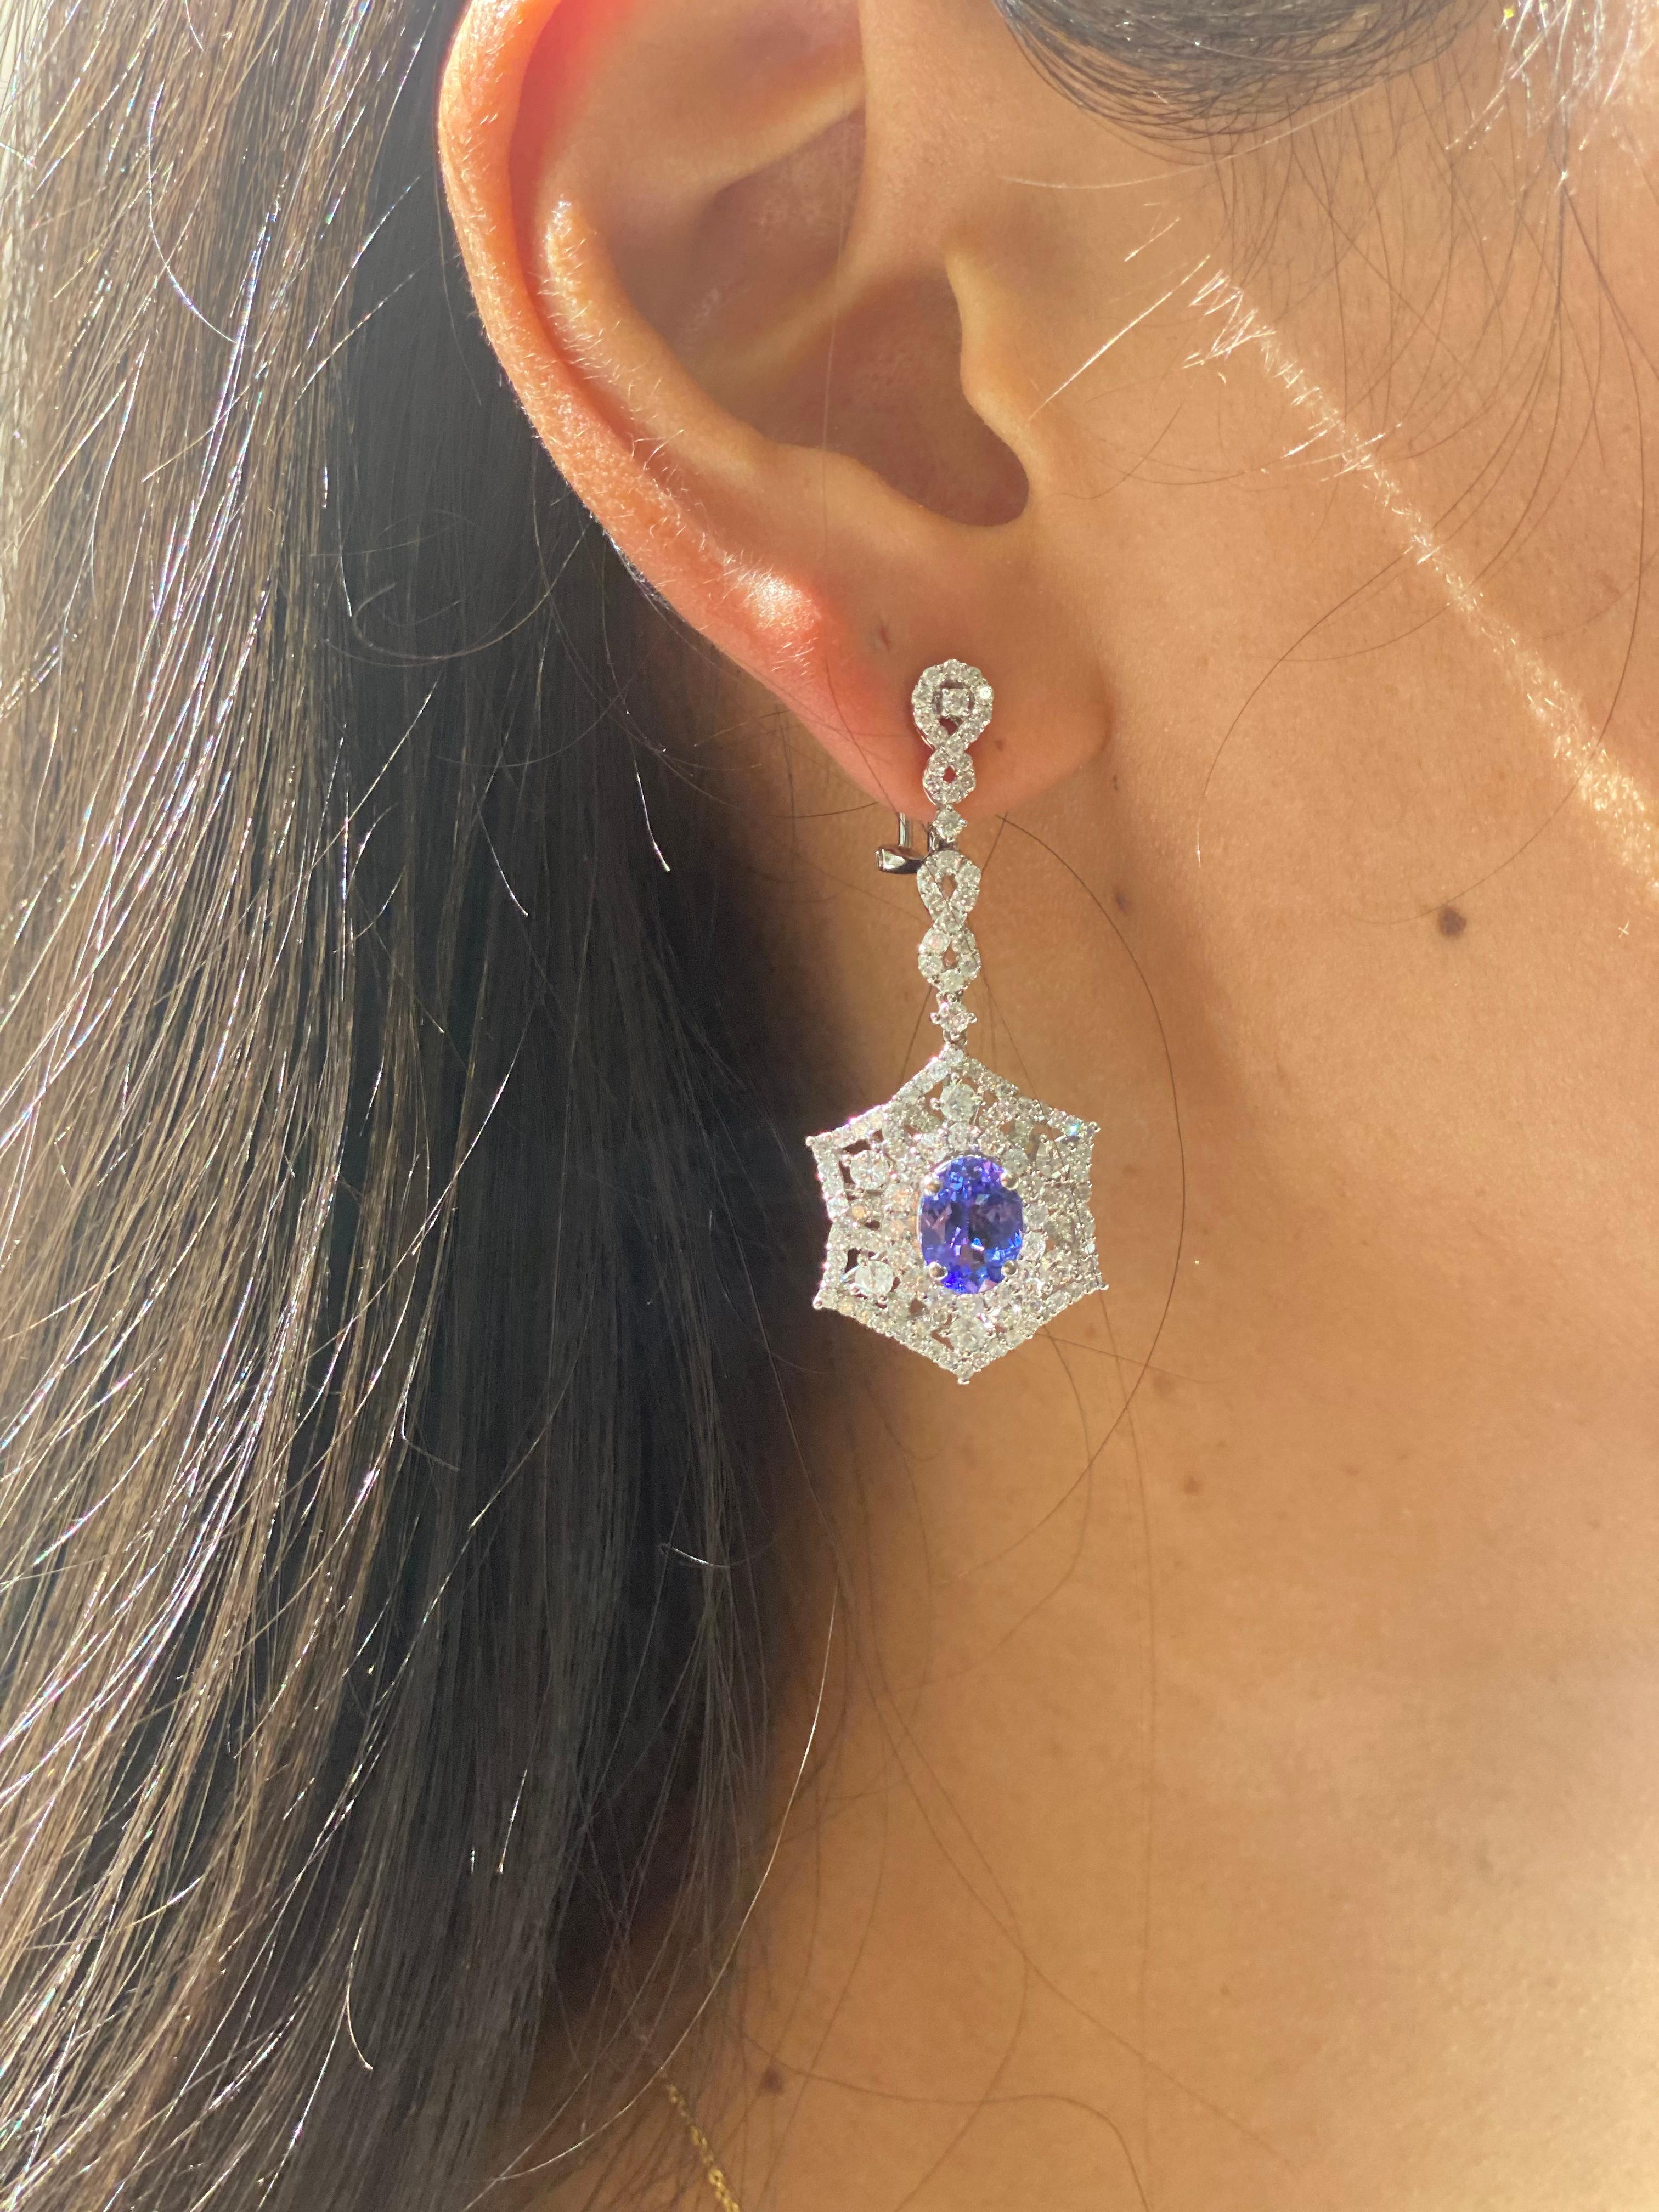 Oval cut Tanzanite centers with 3.07ct total weight, and 4.07 carats of diamonds creating elegant flower shape patterns surrounding the gem all set in a rich 18k white gold 

Details: 
weighs 11.8g
2” long 
